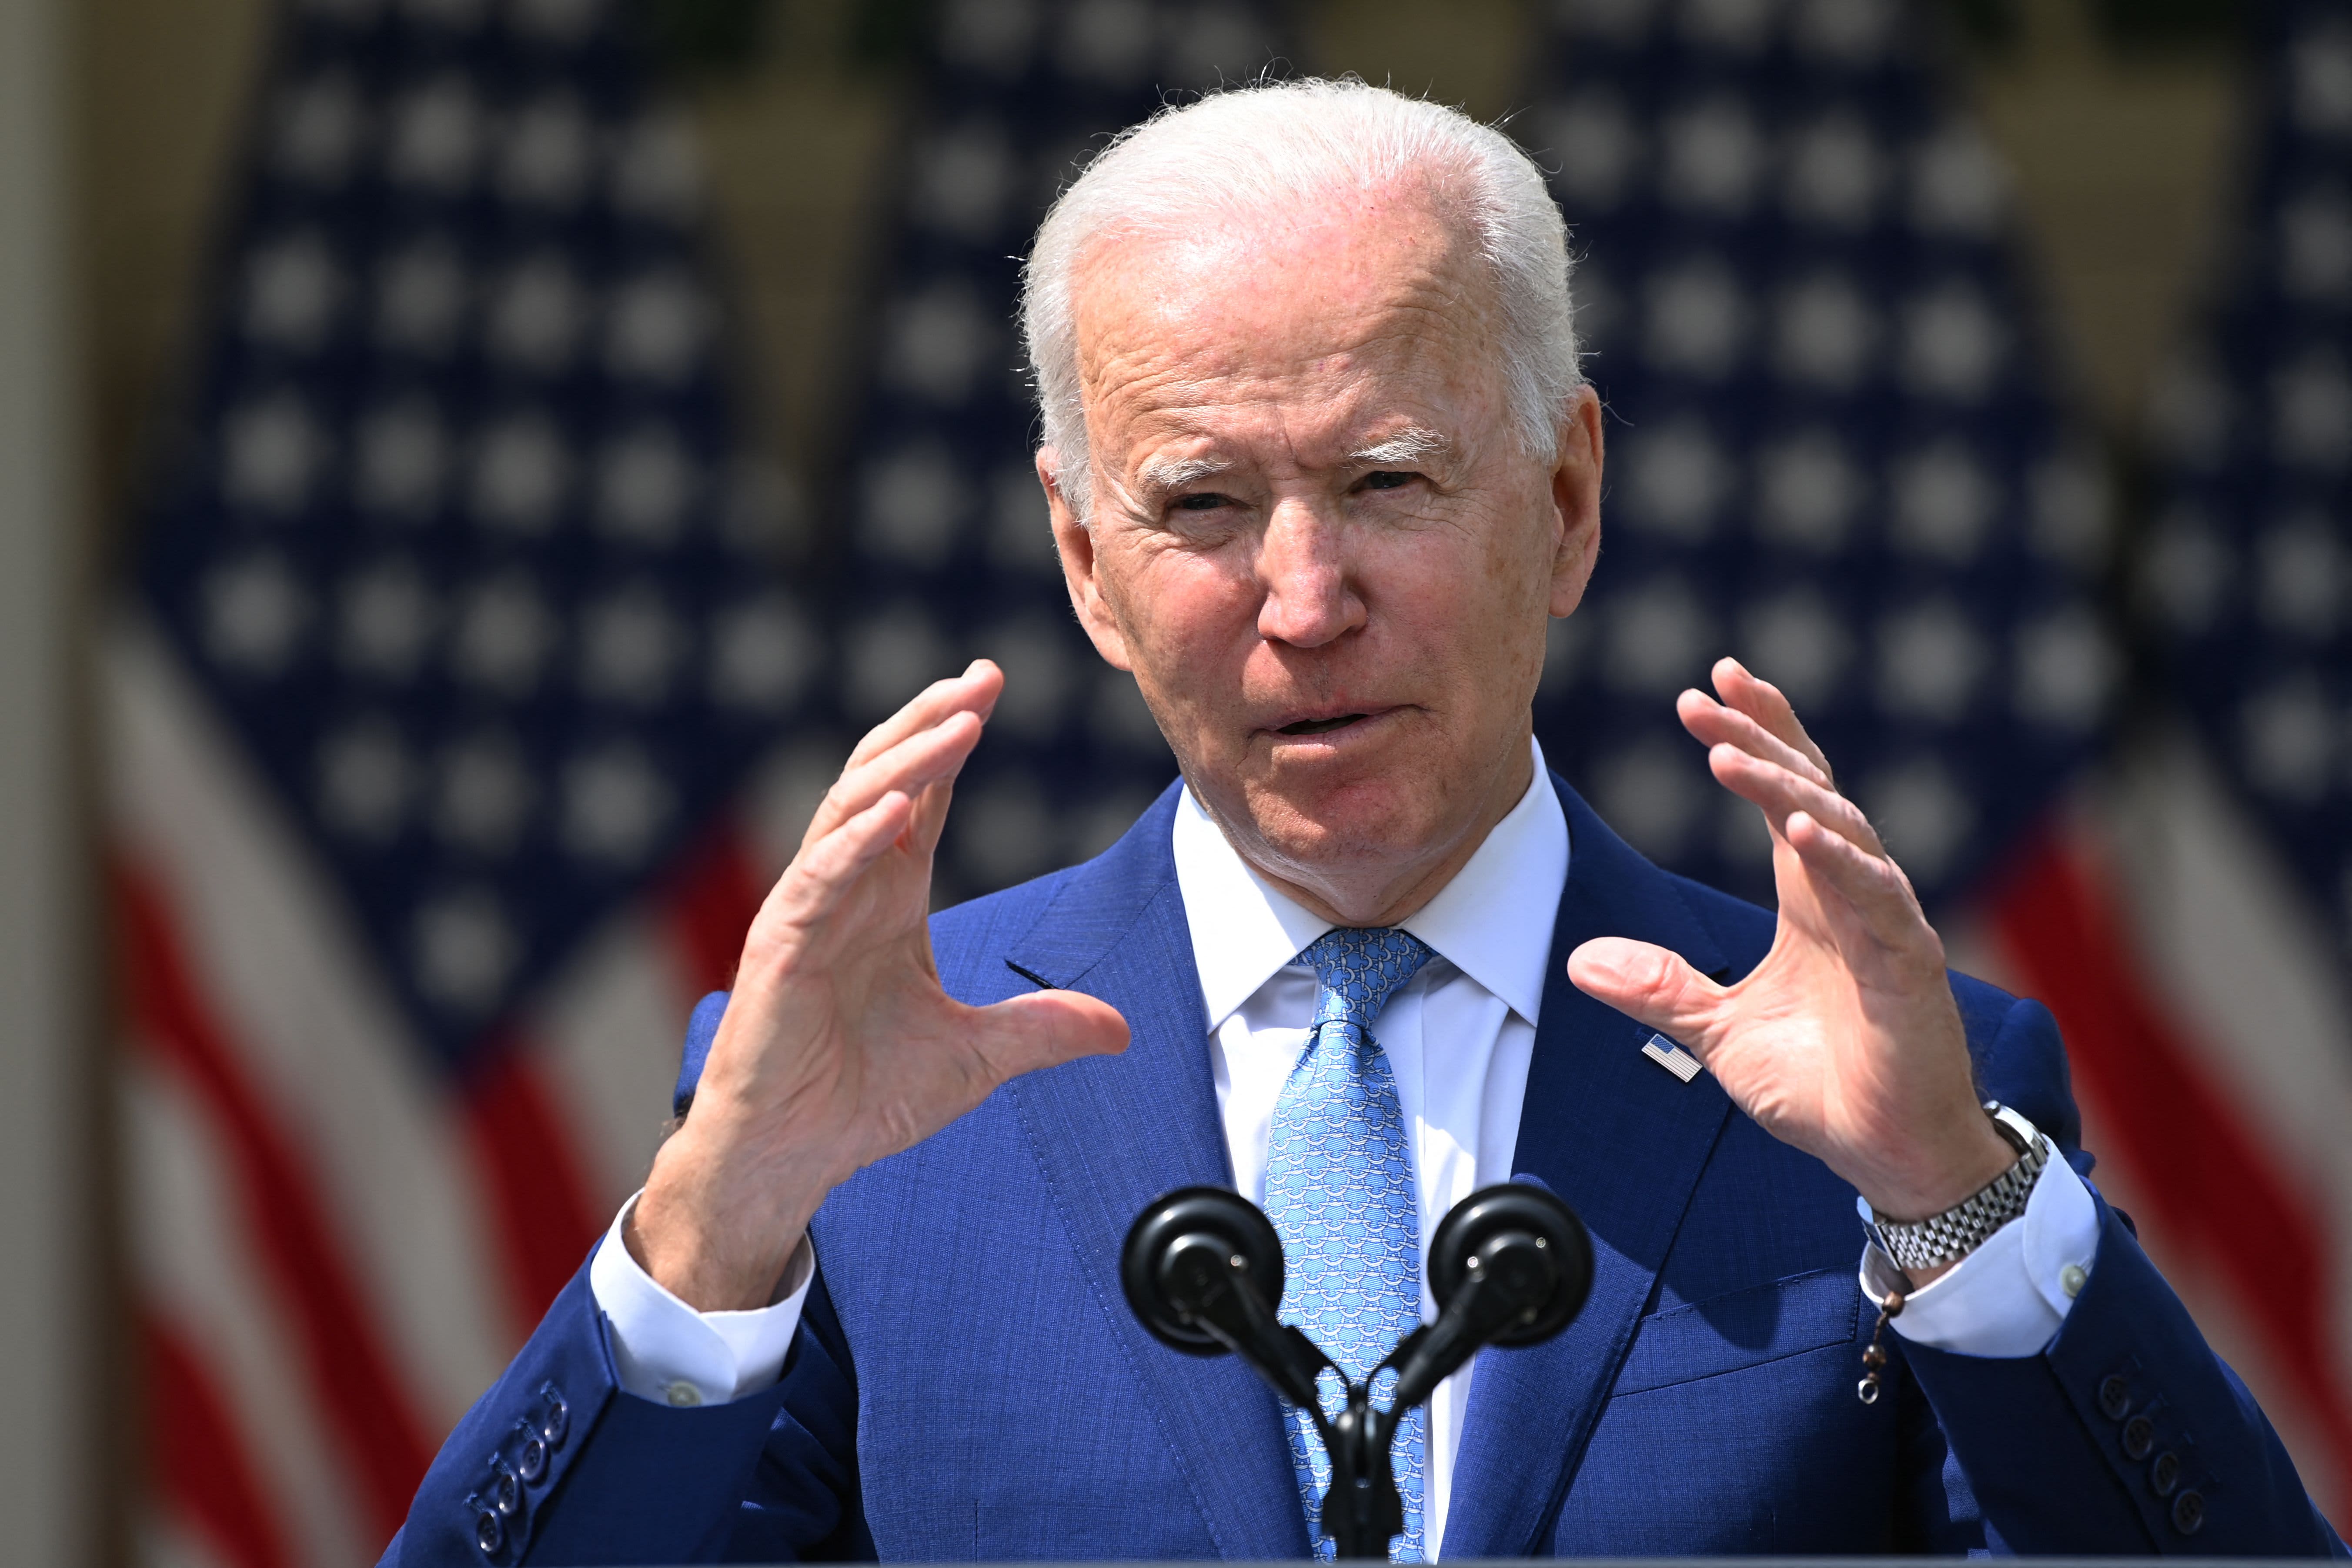 Biden says gun violence is an epidemic, and calls for the national red flag law